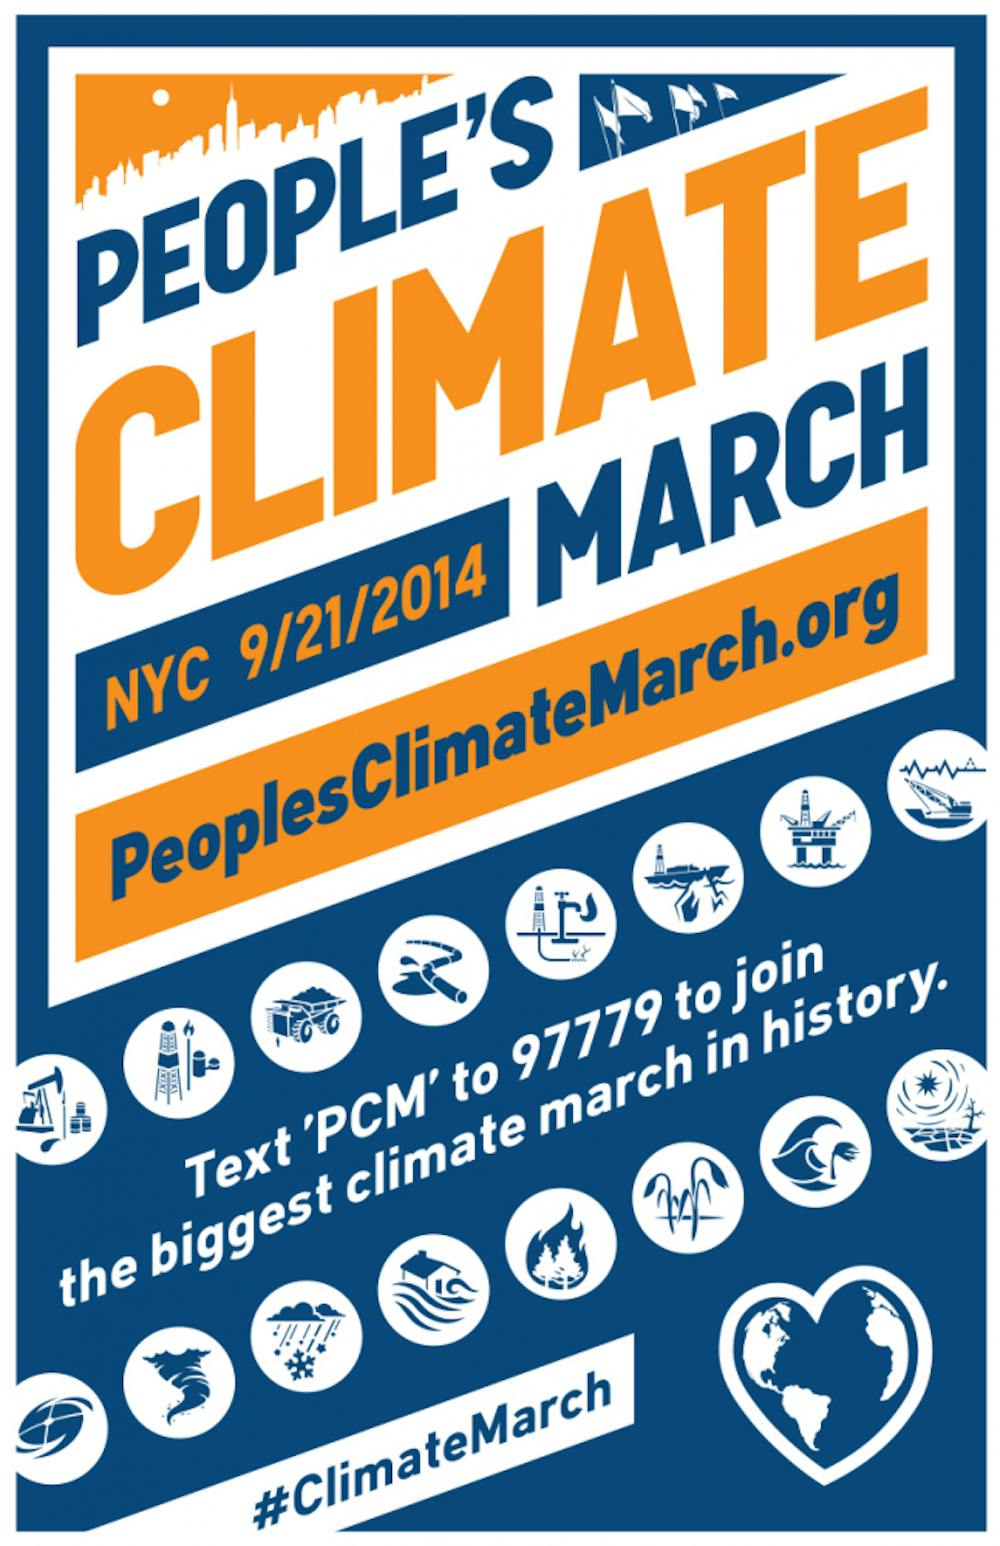 <p><em>PHOTO PROVIDED BY PEOPLE'S CLIMATE MARCH</em></p>